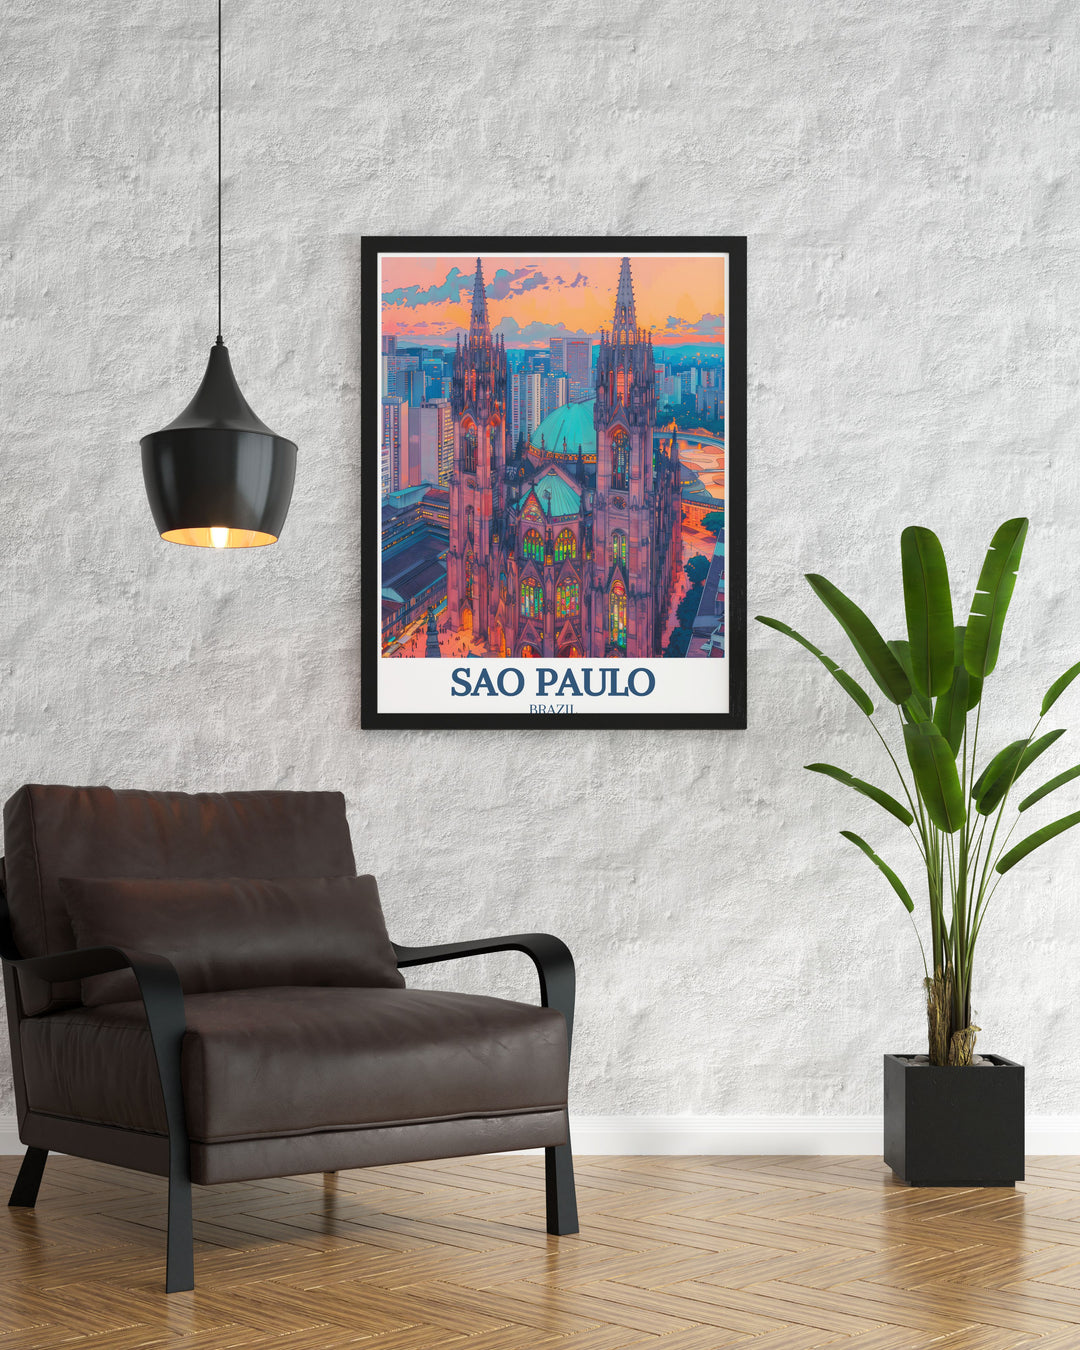 Elegant print featuring São Paulo Cathedral, a neo Gothic architectural marvel, perfect for adding a touch of historical grandeur to your home decor.